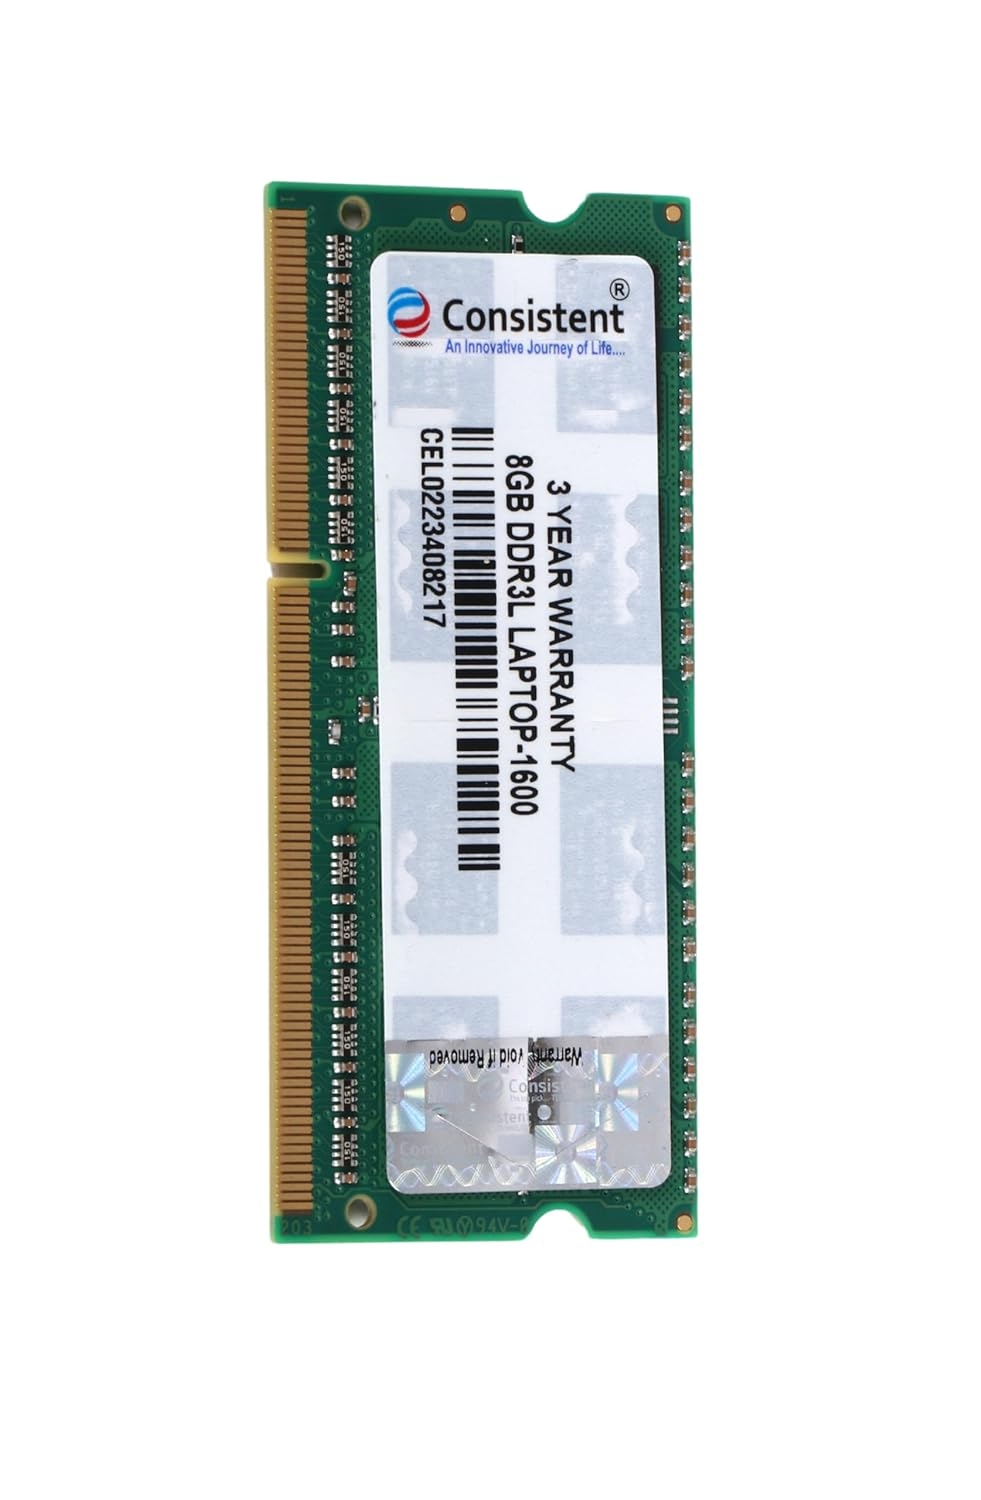 Consistent 8GB DDR3 1600 Laptop RAM, Plug-and-Play, No Additional Drivers Required with 3 Year Warranty